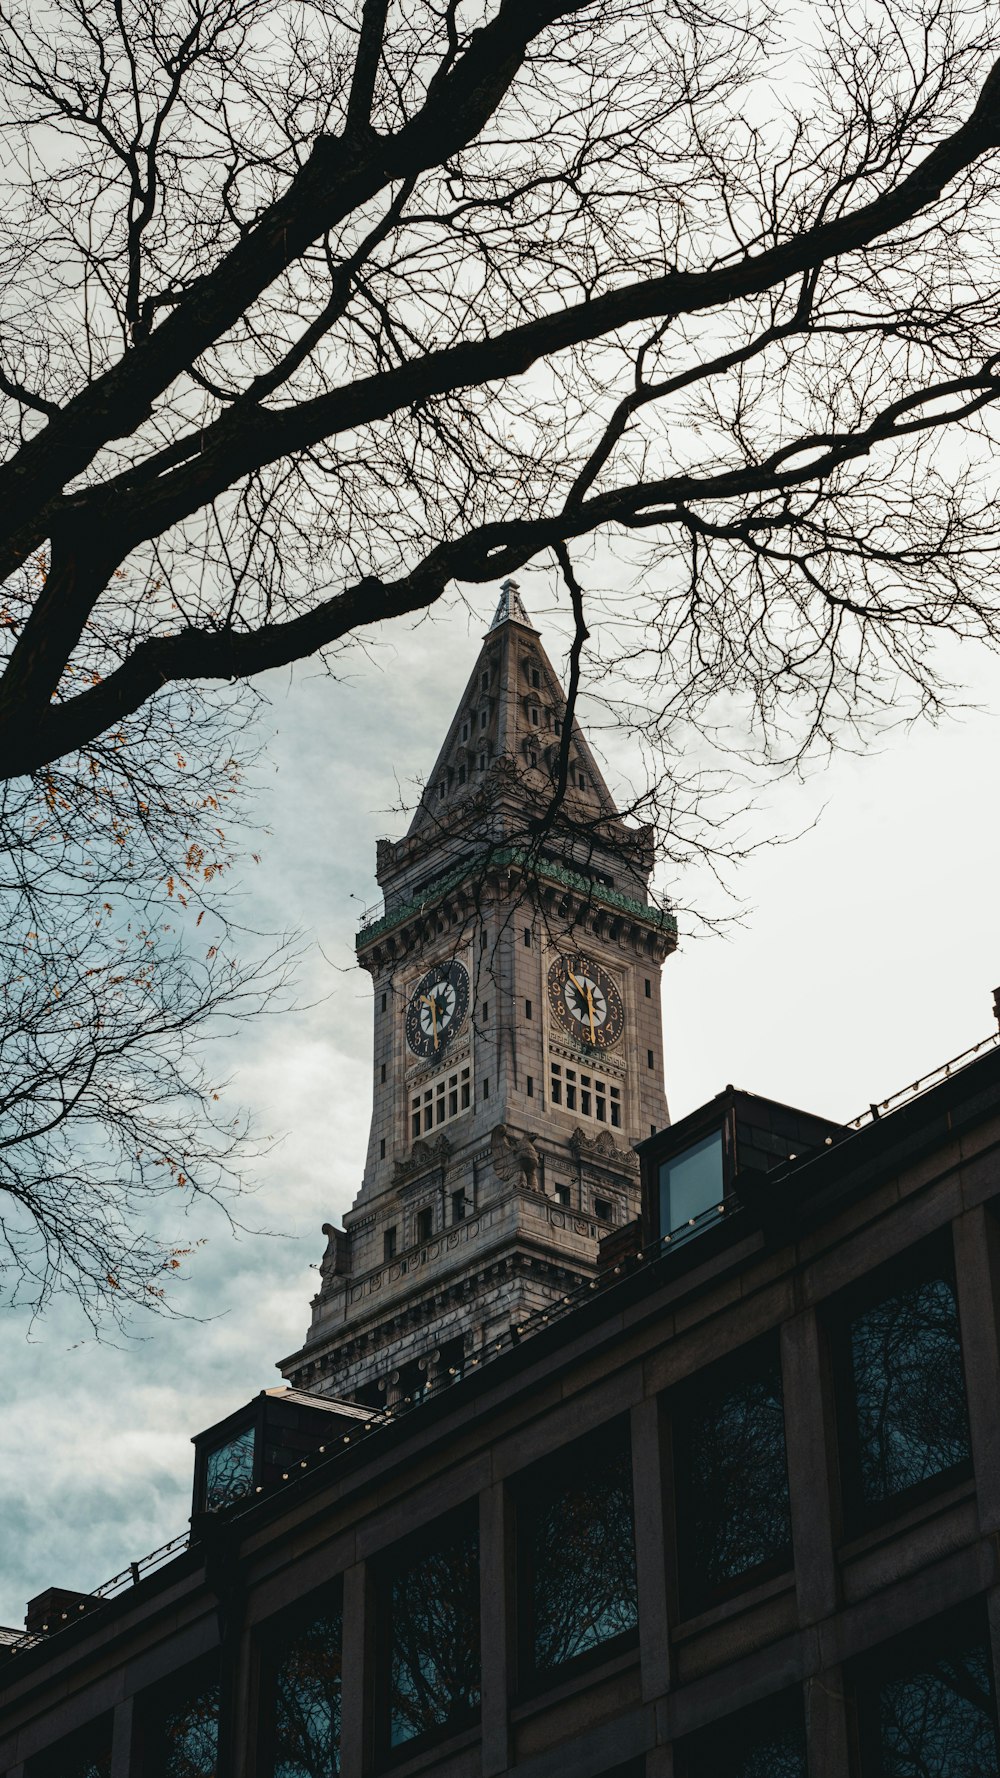 a clock tower on a building